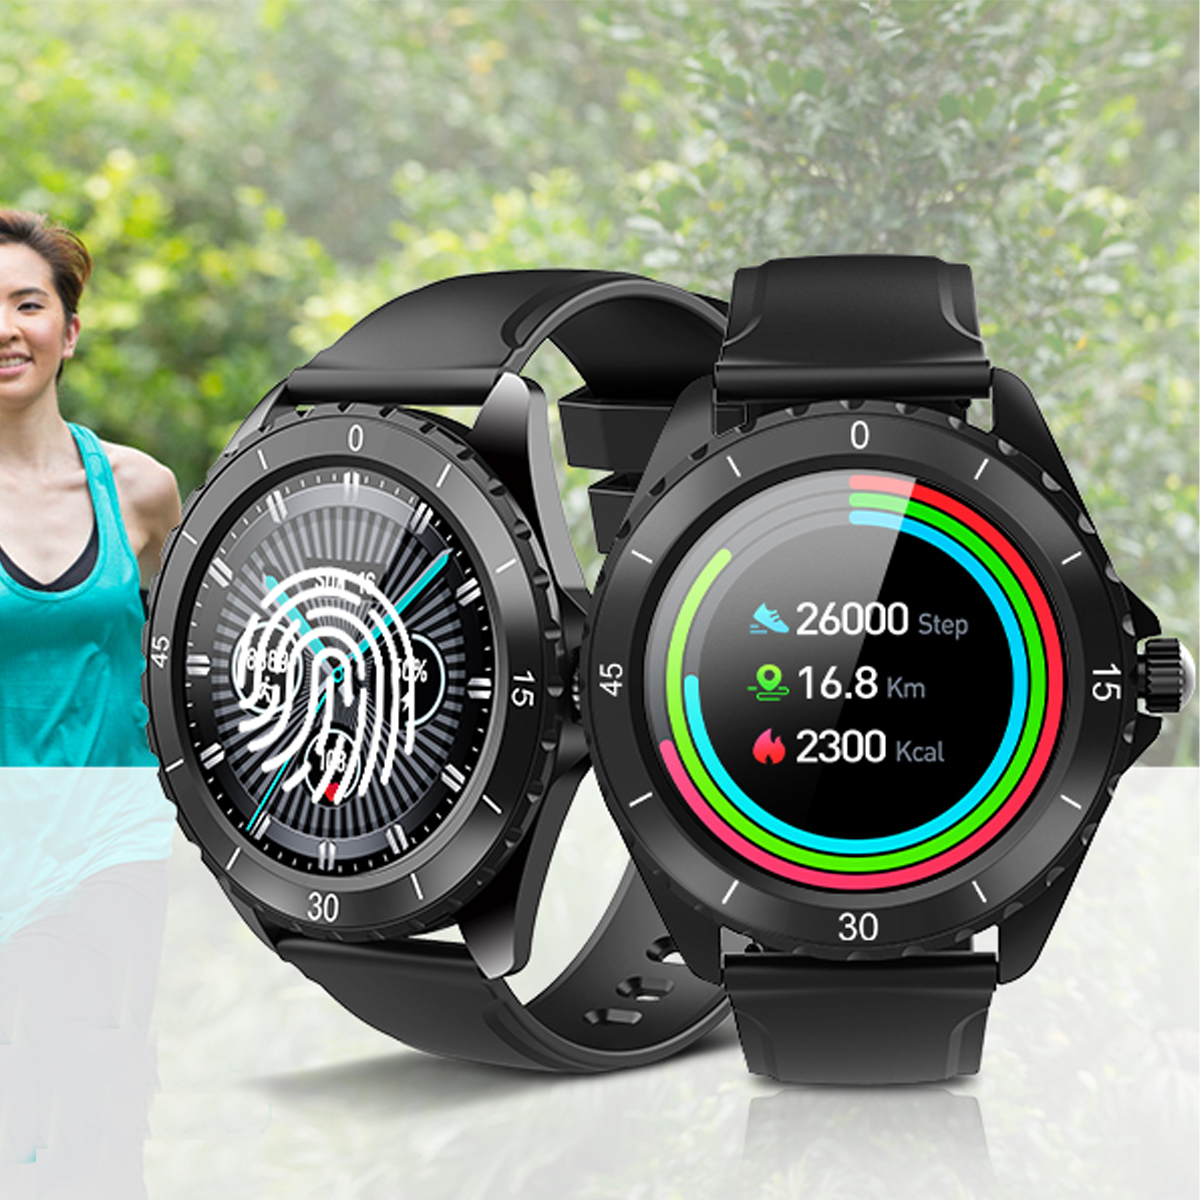 Find ELEGIANT C520 BT 5.0 1.3 inch Full Touch Screen Heart Rate Sleep Monitor 30 Days Standby IP68 Waterproof Smart Watch for Sale on Gipsybee.com with cryptocurrencies